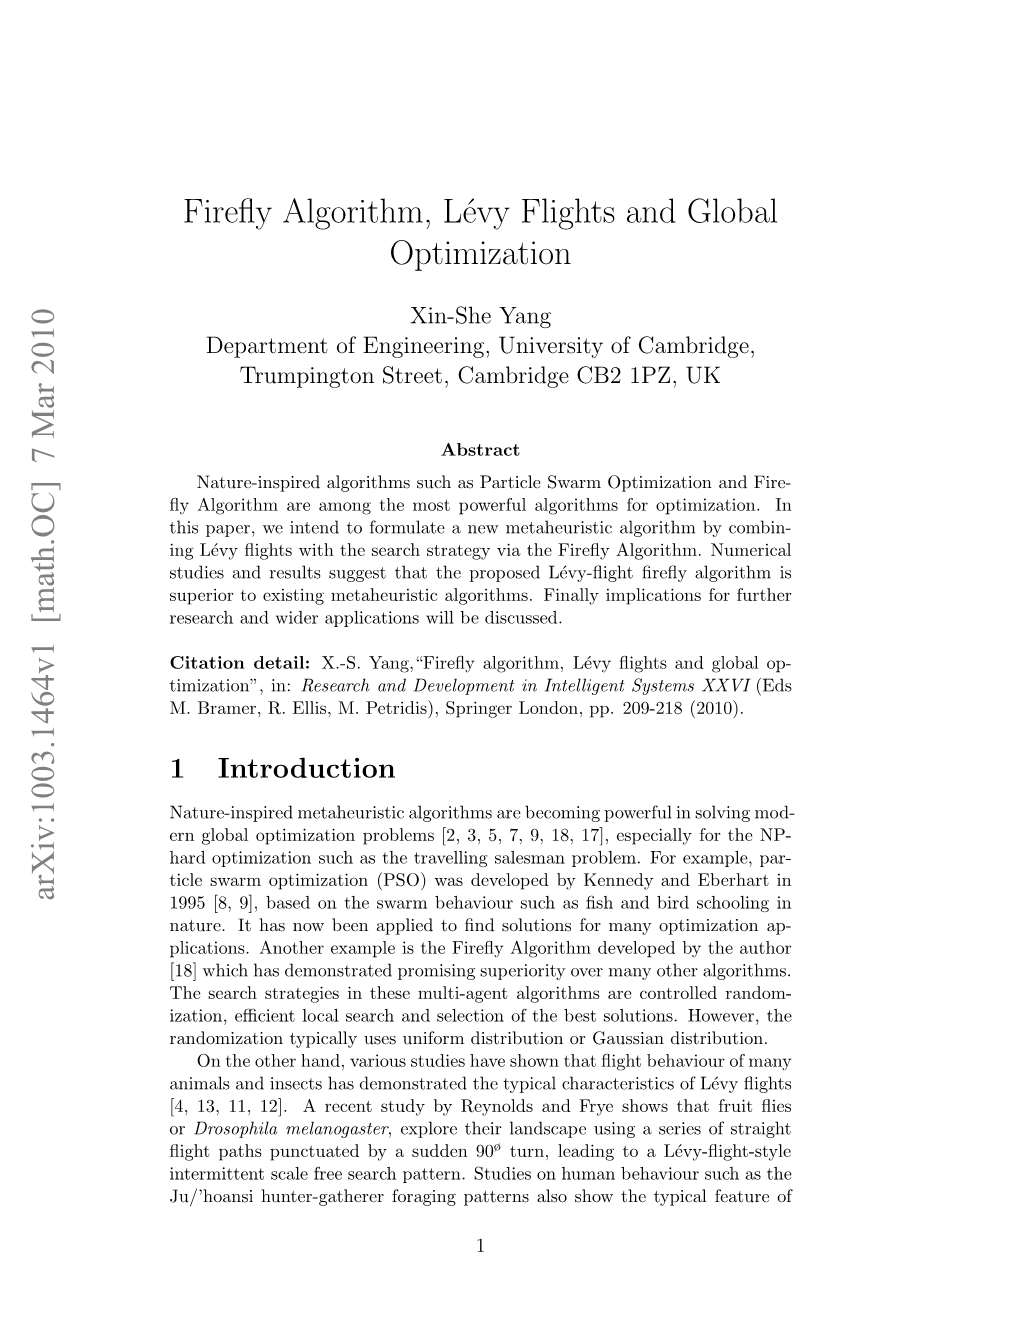 Firefly Algorithm, Levy Flights and Global Optimization